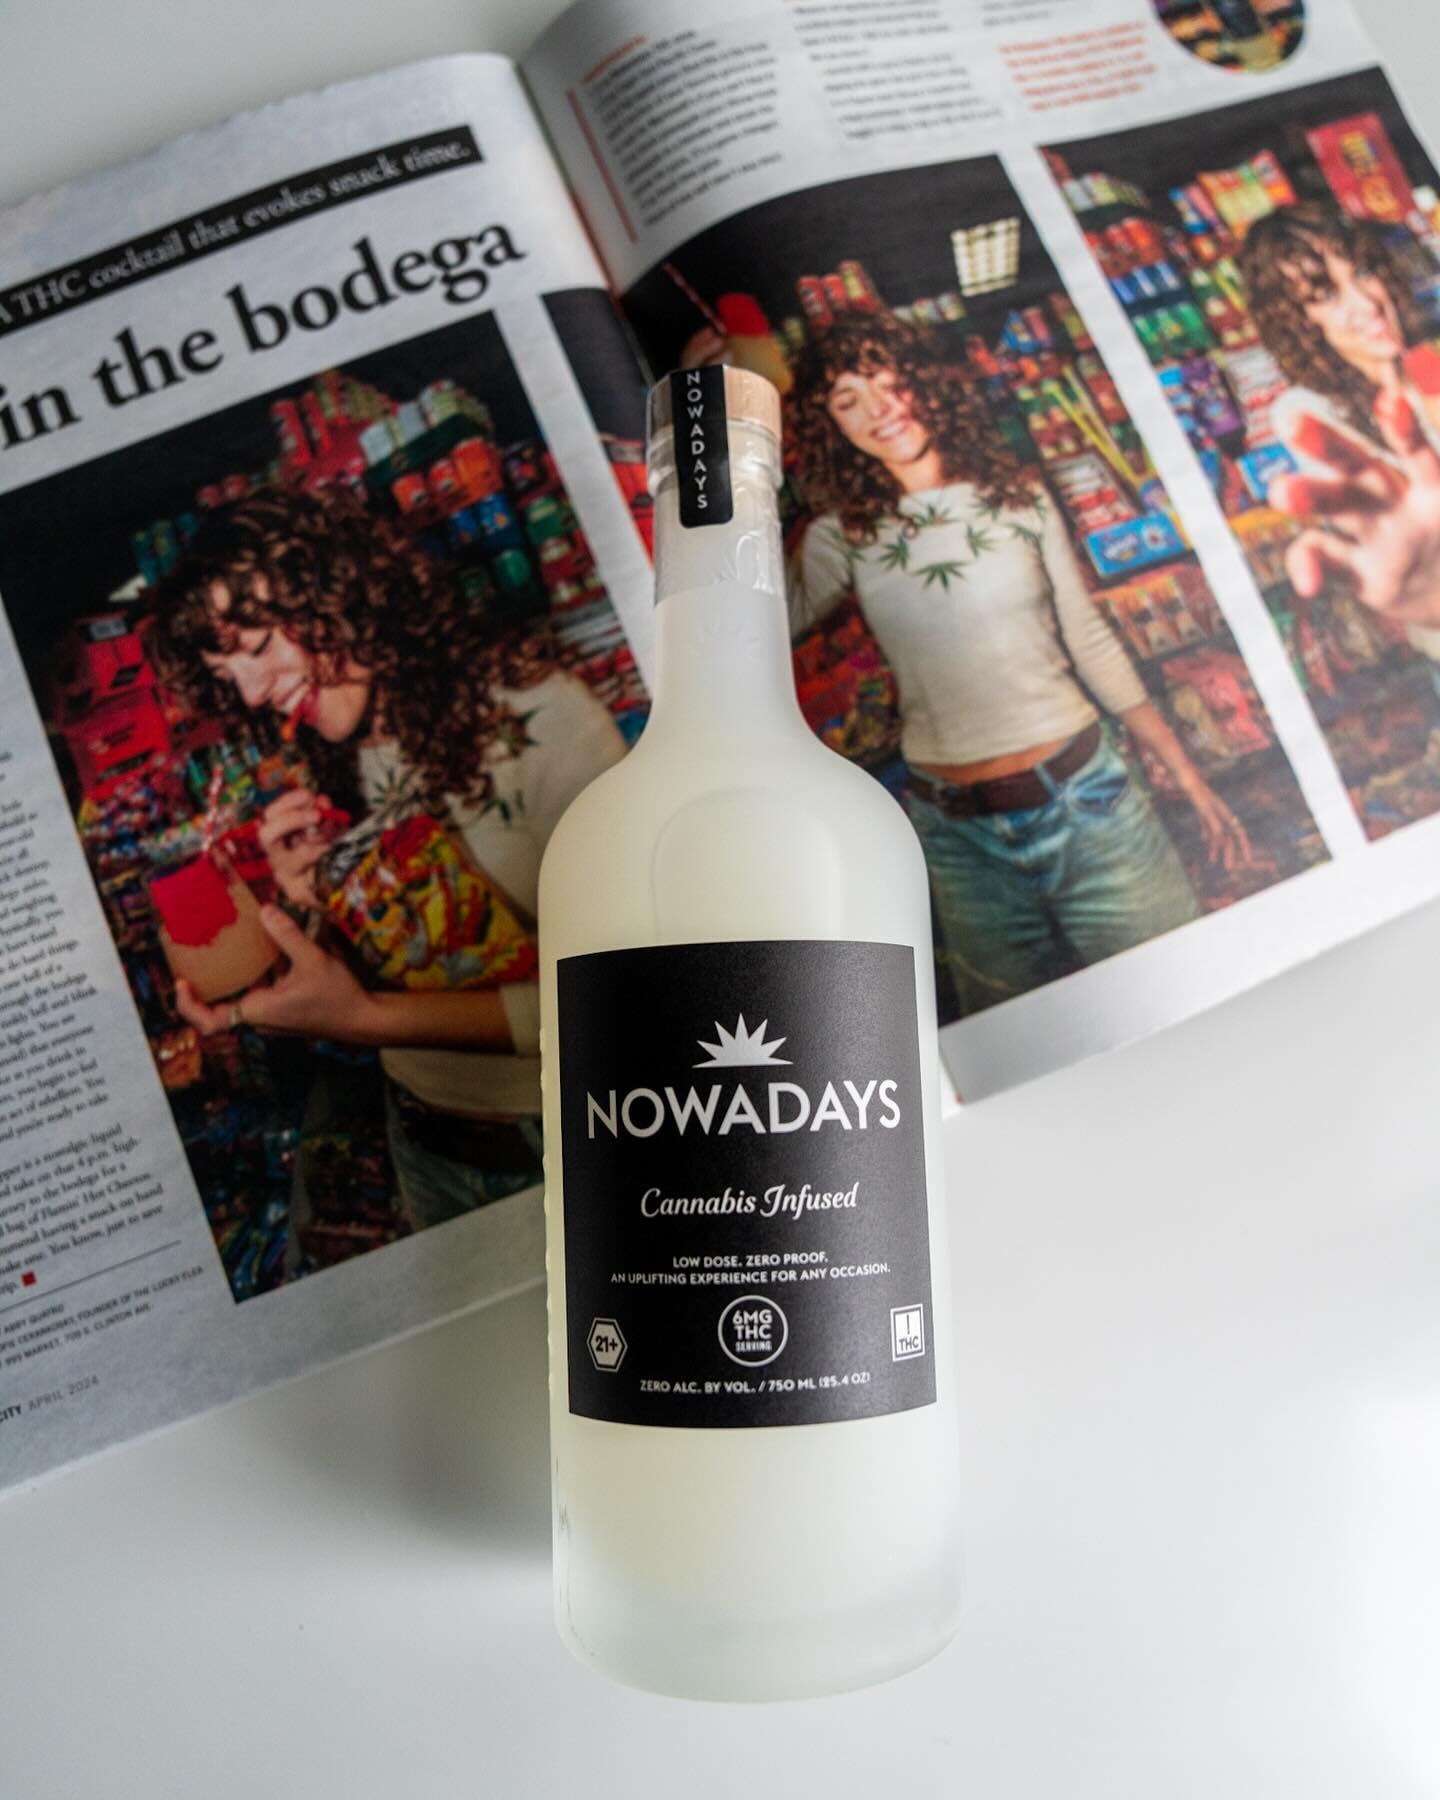 THANK YOU to @roccitymag for featuring OSBS &amp; fan favorite canna spirit @trynowadays in the April issue! 🌿🍹

Can confirm the cocktail is delicious 🤤 

Snag a copy of CITY for the recipe &amp; pick up a bottle of Nowadays from the shop. Be sure